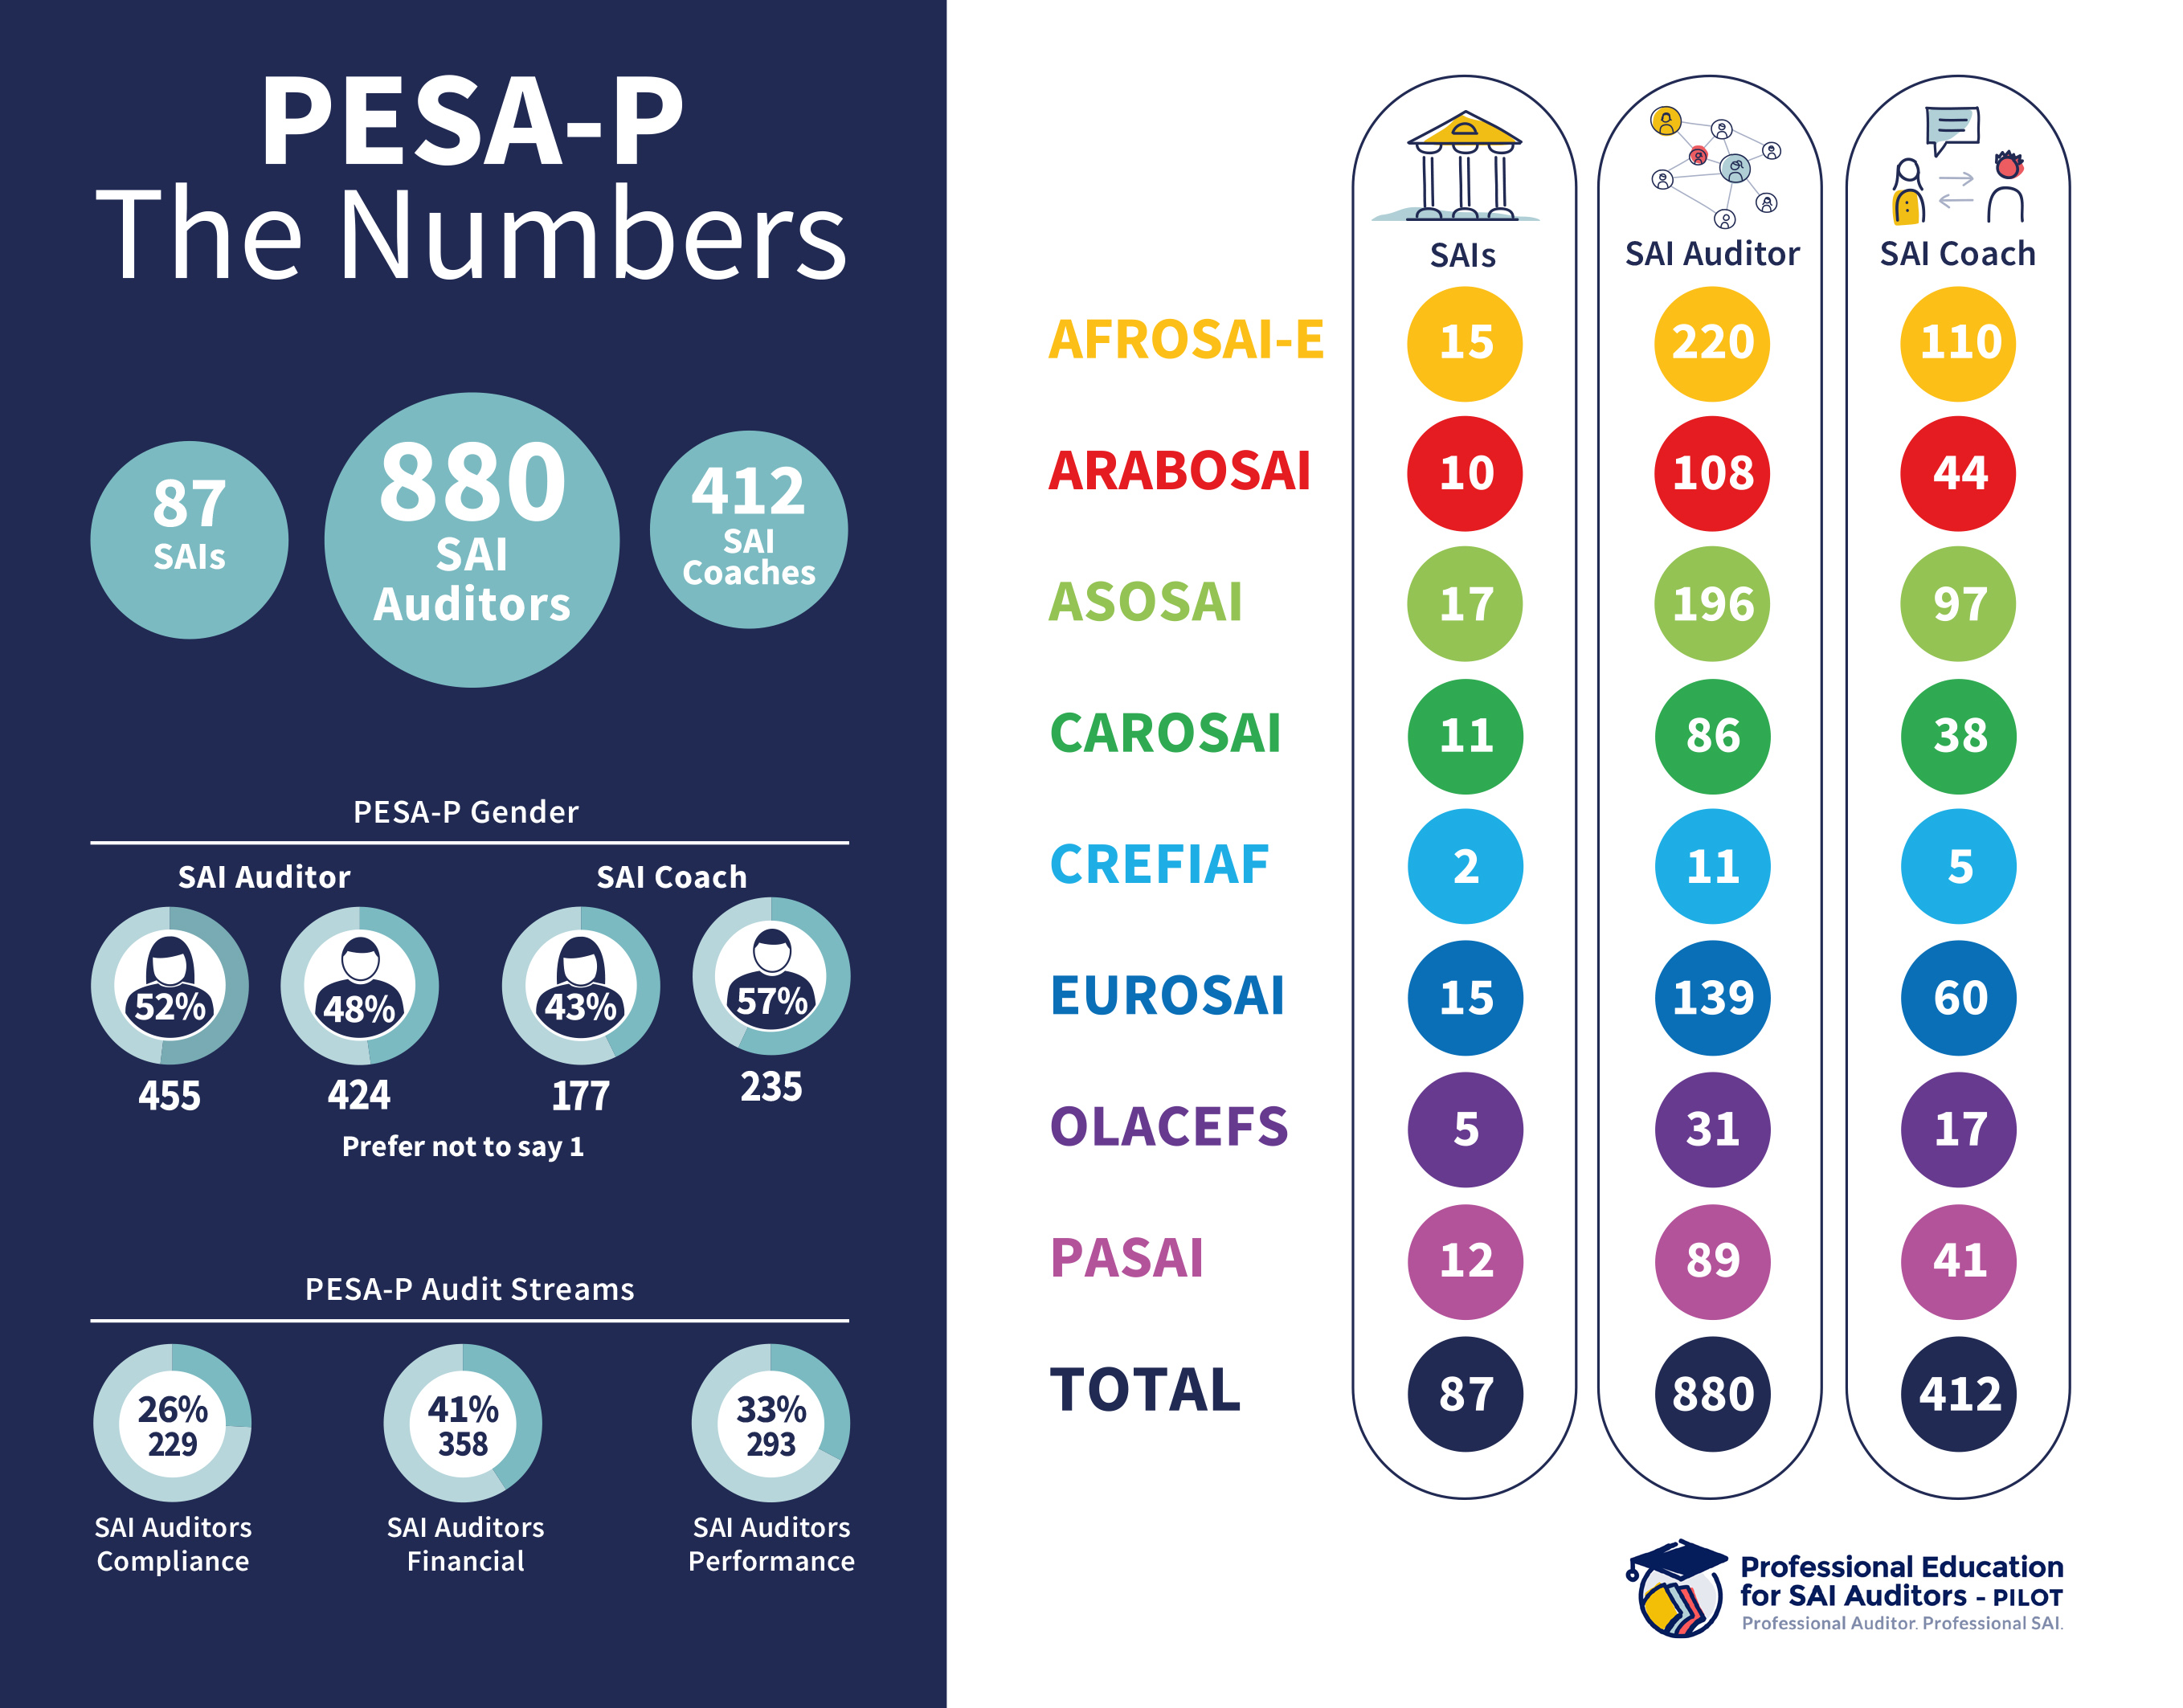 The PESA-P principle of inclusivity shows in the numbers